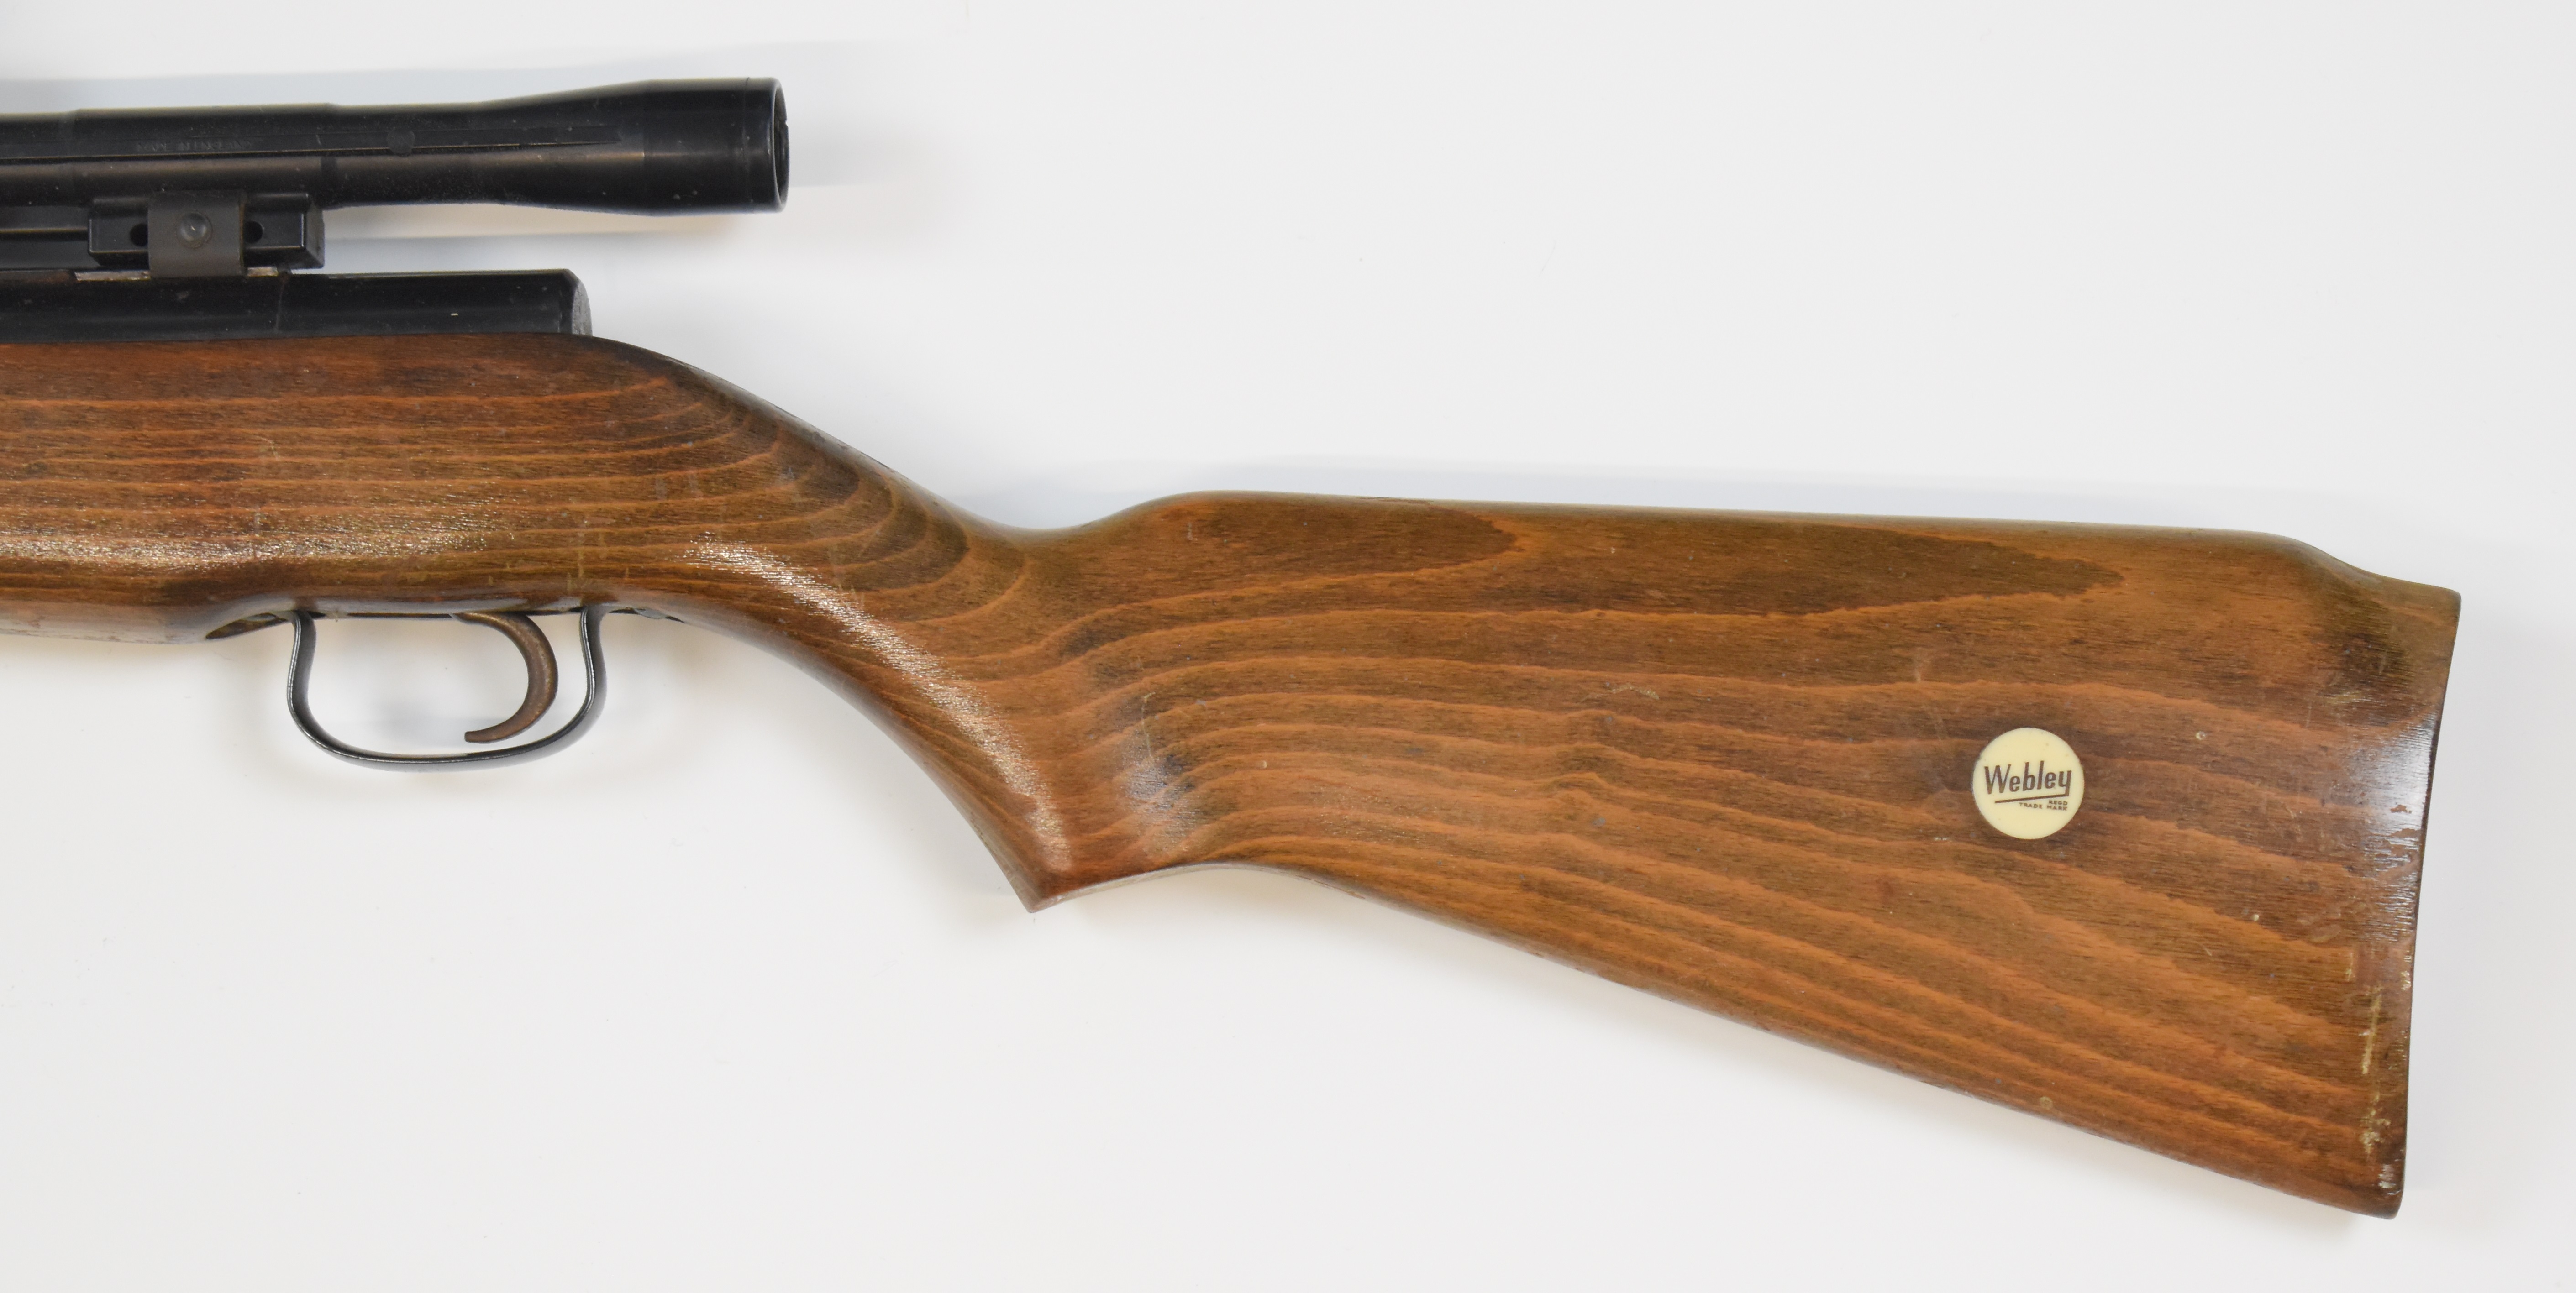 Webley Falcon .22 air rifle with semi-pistol grip, Webley plaque inset to the stock and scope, NVSN. - Image 7 of 9